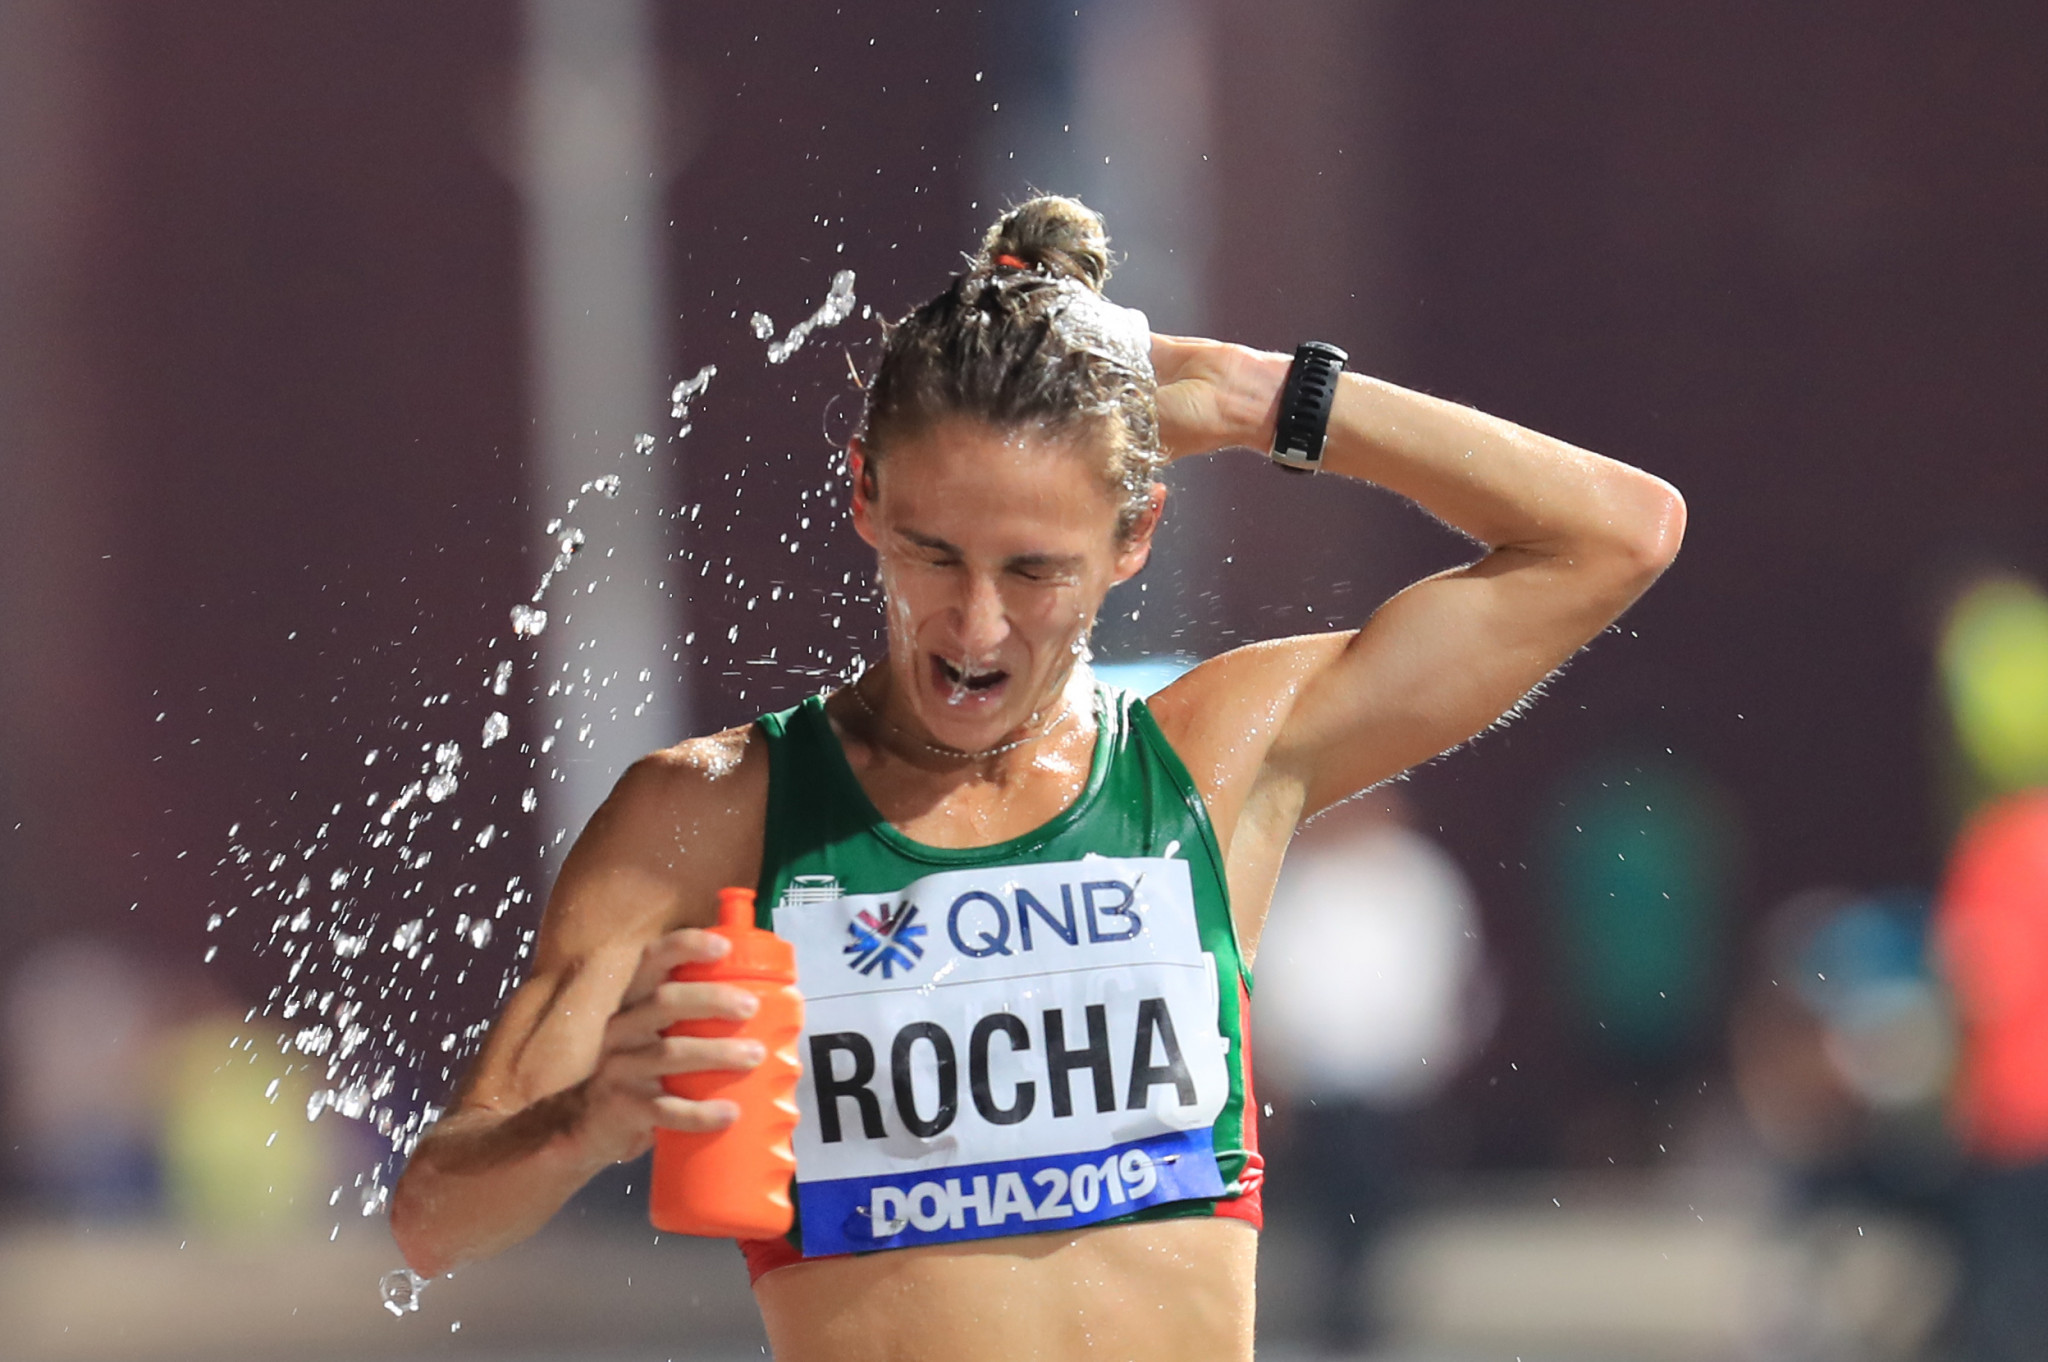 Portugal's home hero, Salomé Rocha during the World Athletics Championships marathon in Qatar last year ©Getty Images